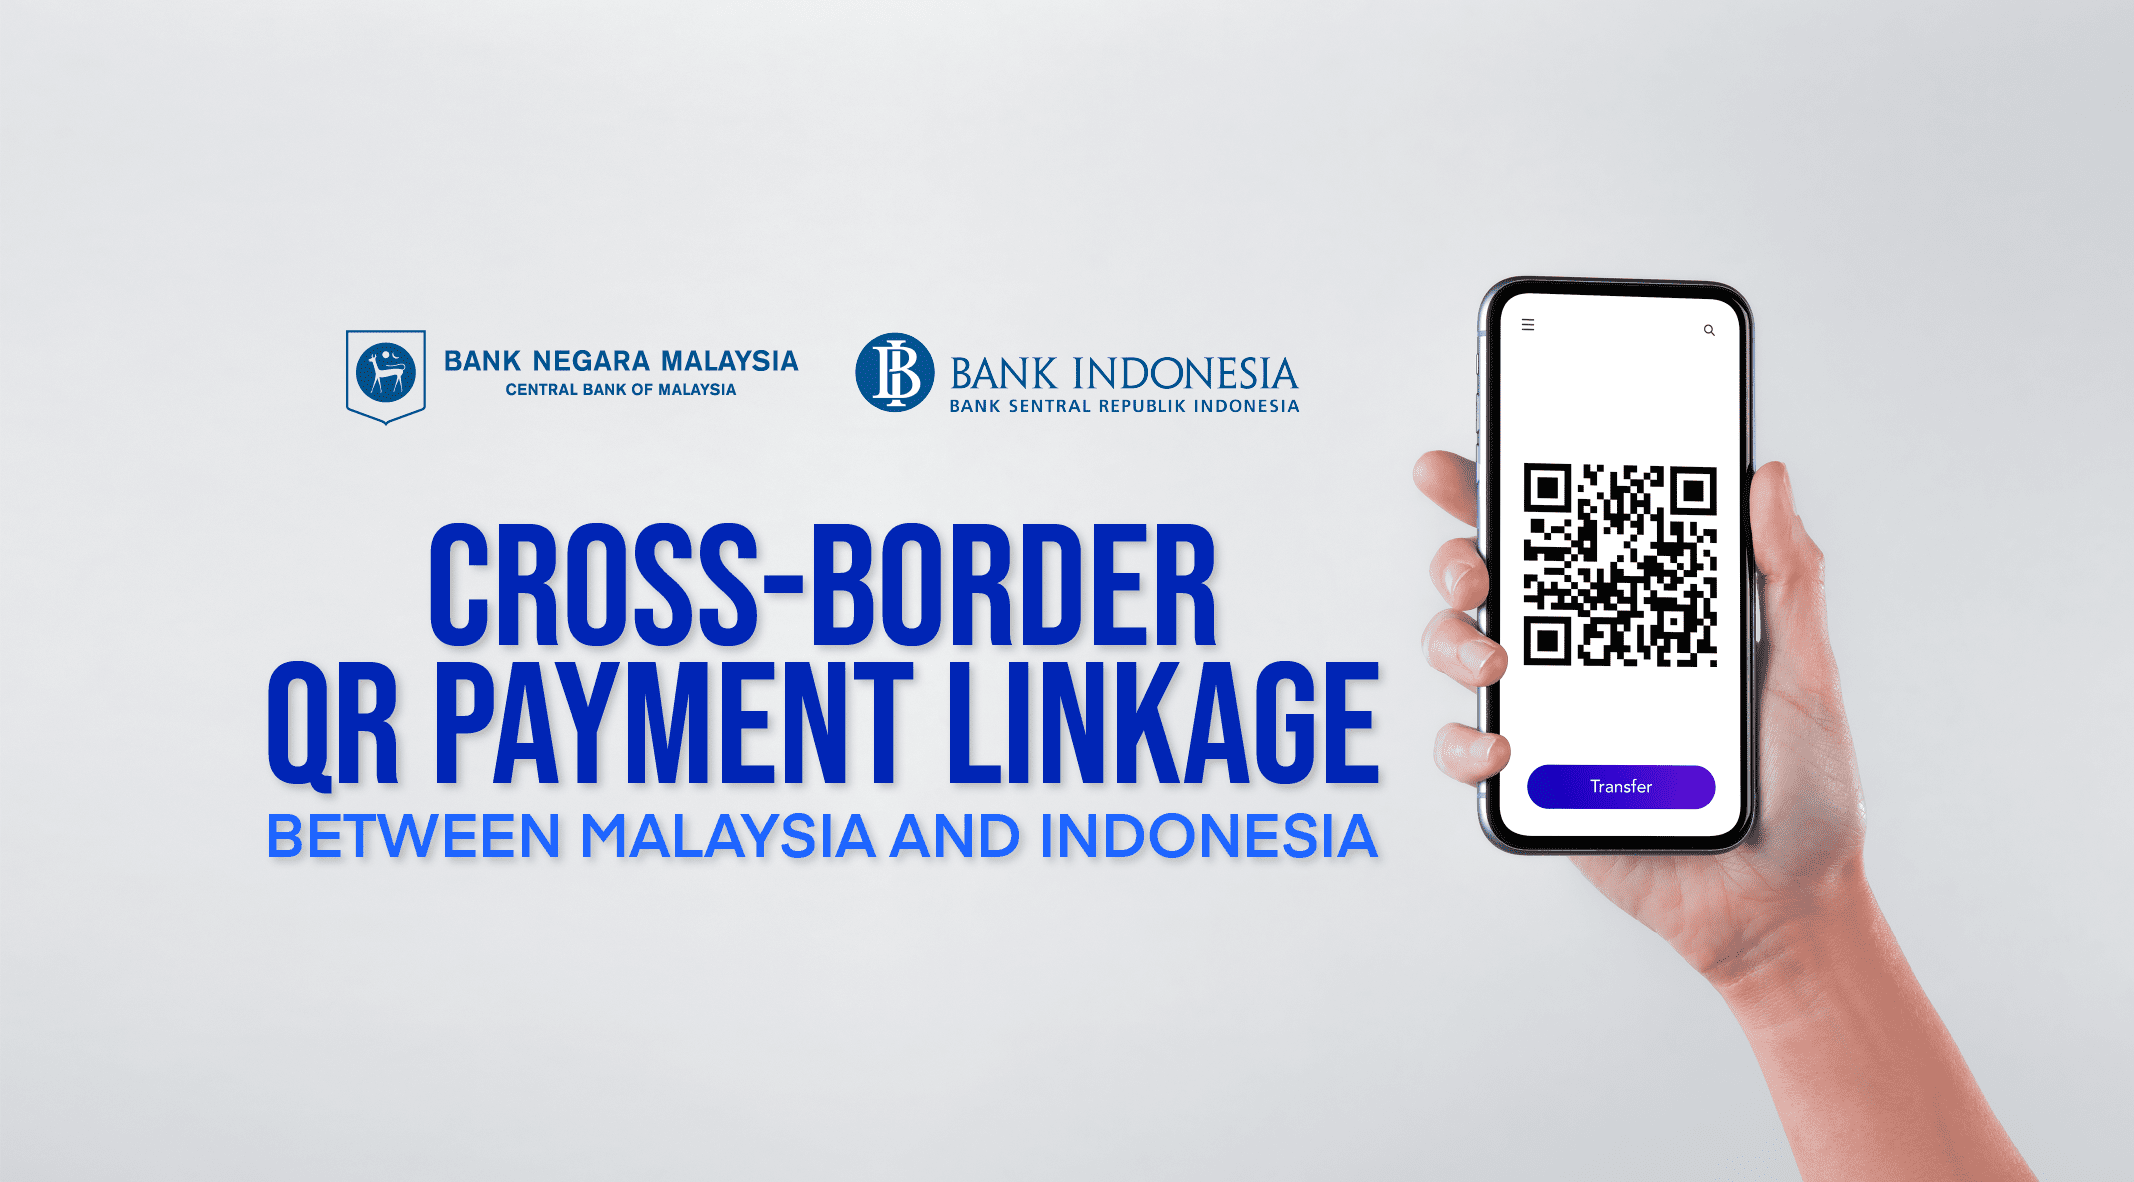 Malaysia and Indonesia Pilots Phase 1 of Cross-Border QR Payment Linkage